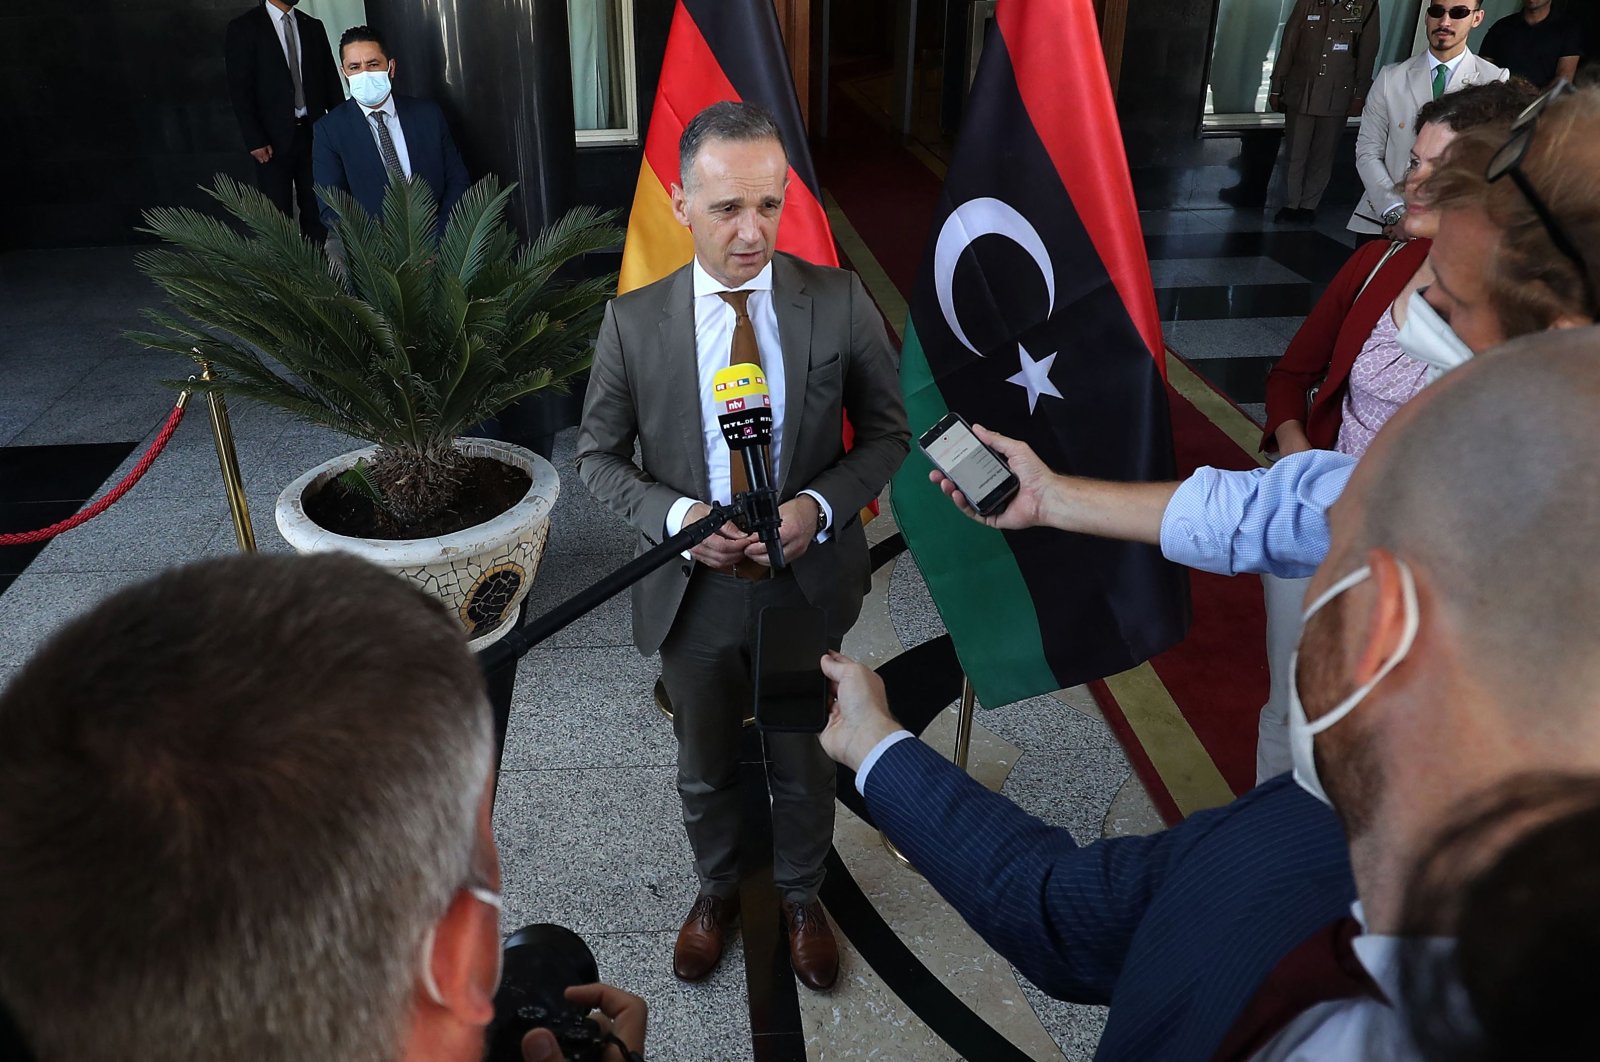 German Foreign Minister Heiko Maas delivers a speech to the press in front of the Council of Ministers headquarters in the Libyan capital Tripoli, Libya, Sept. 9, 2021. (AFP Photo)